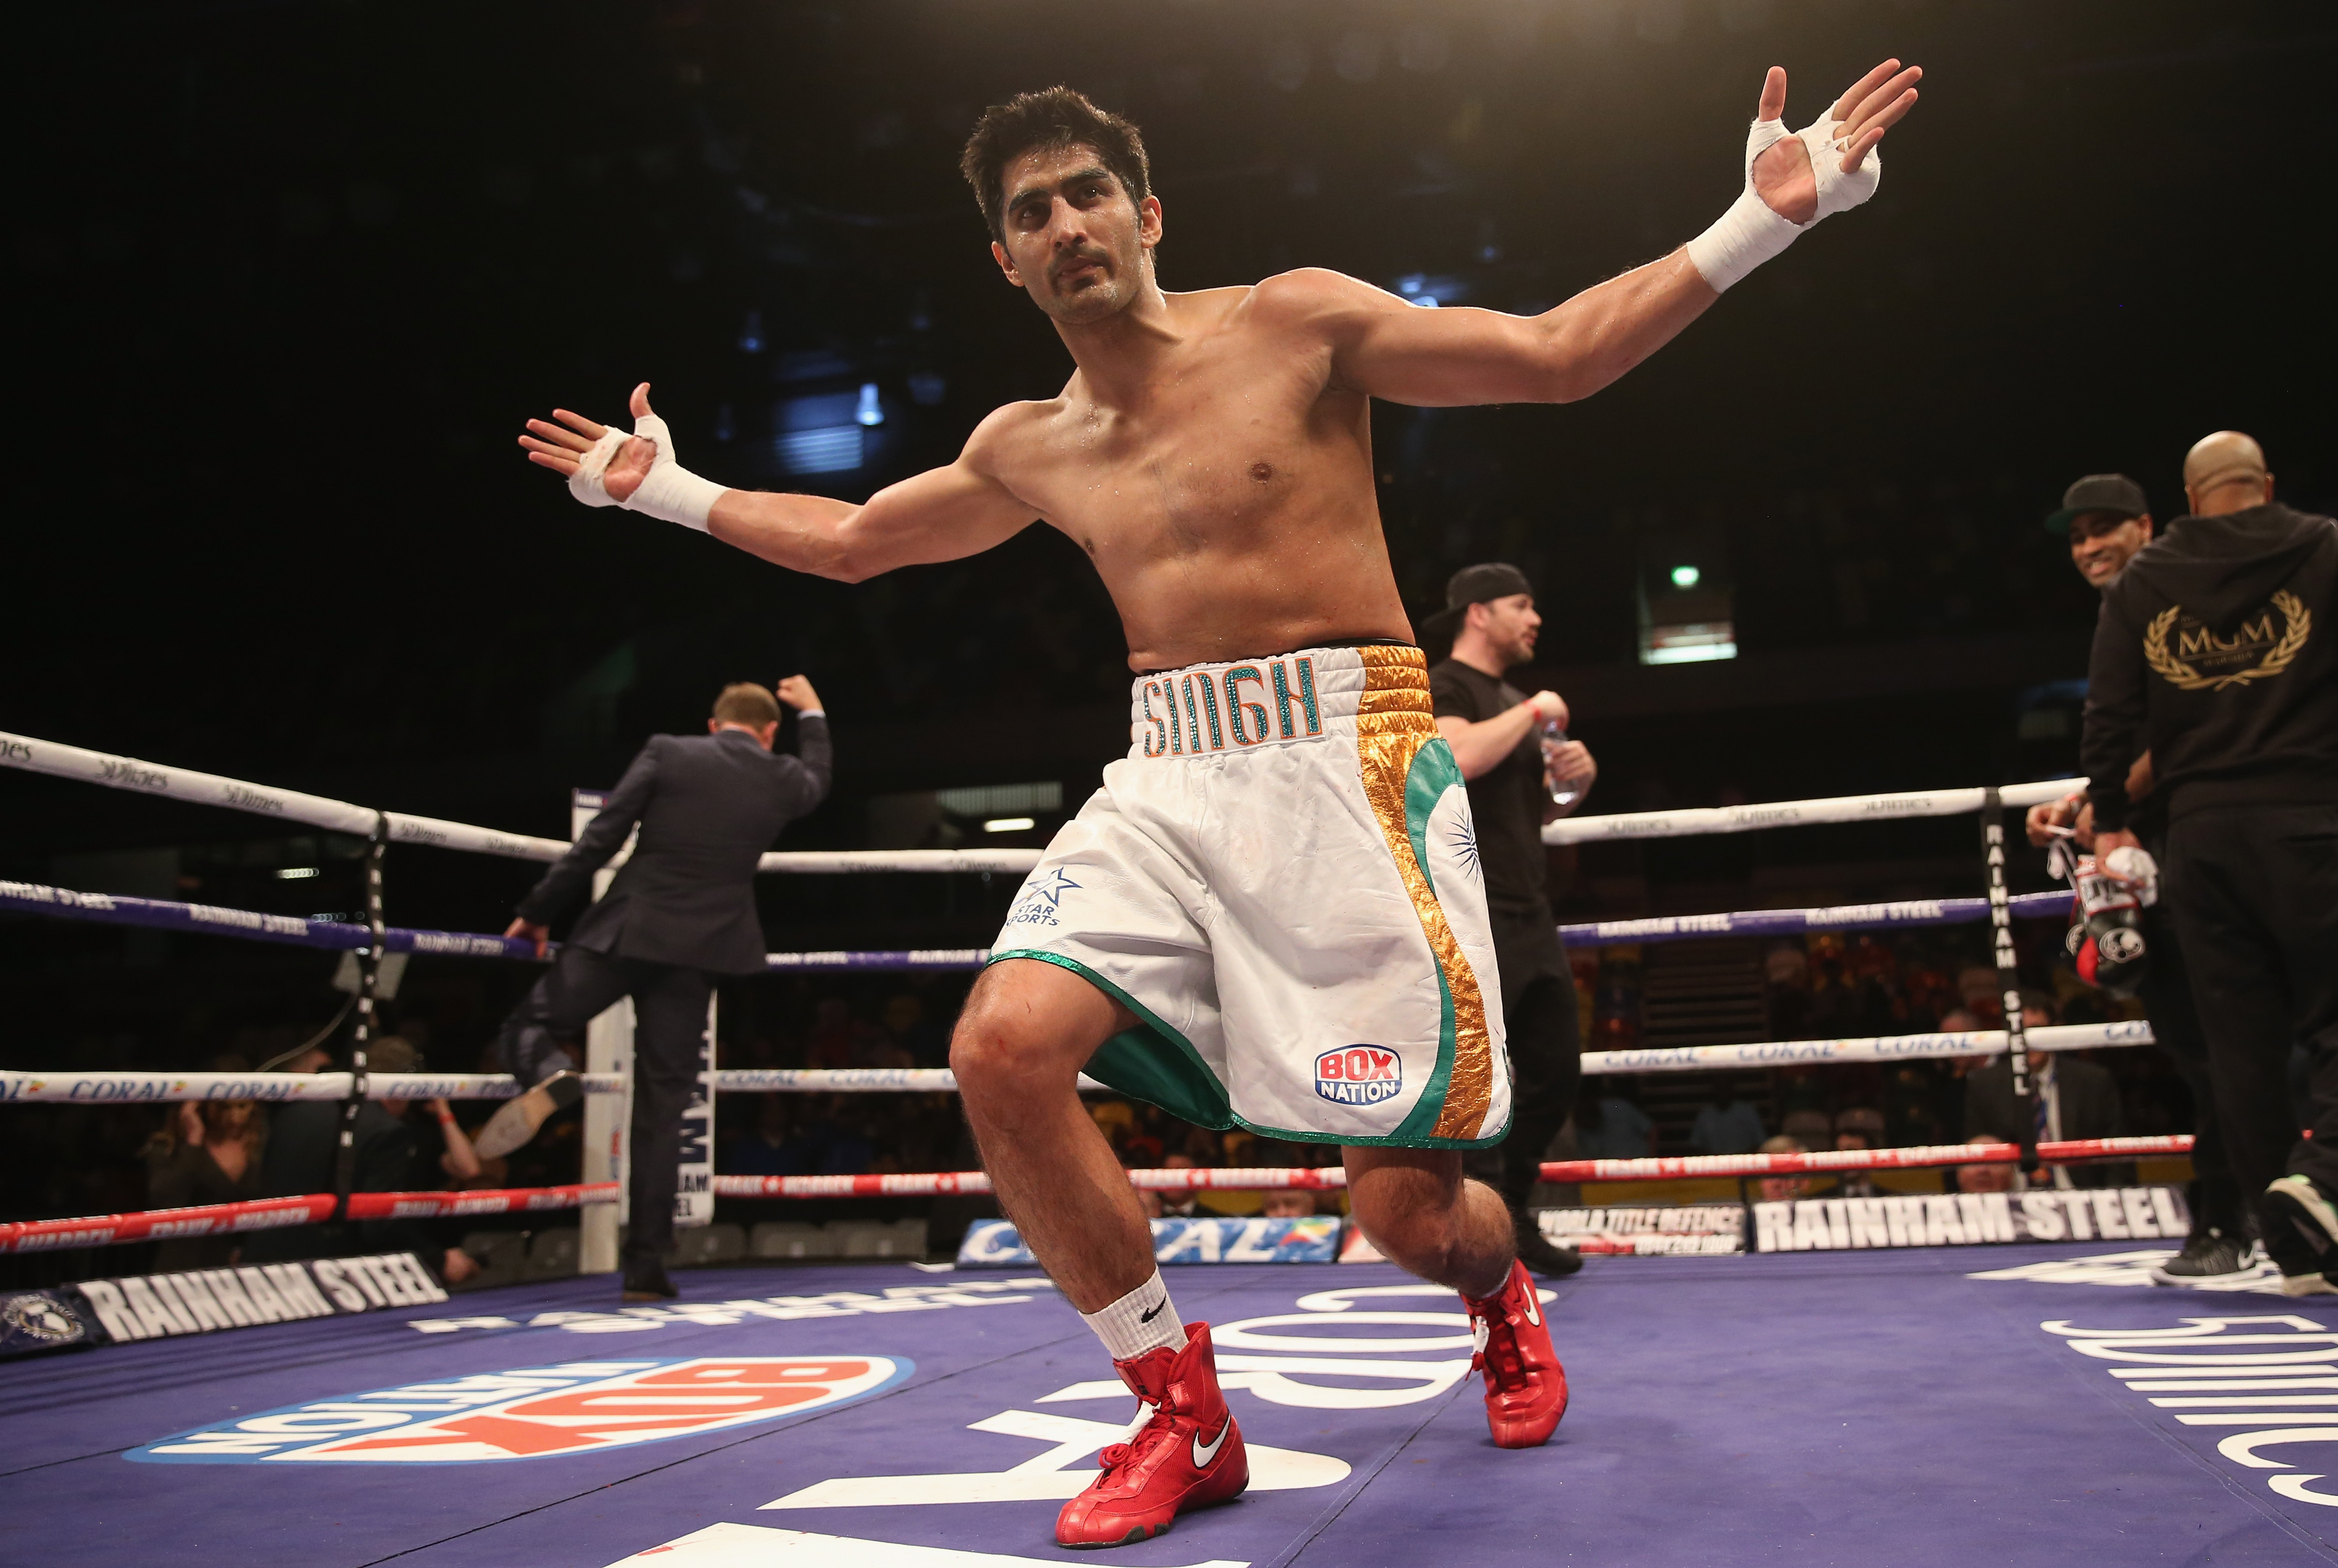 Kerry Hope: On July 16, there will be 1.25 billion disappointed fans of Vijender Singh